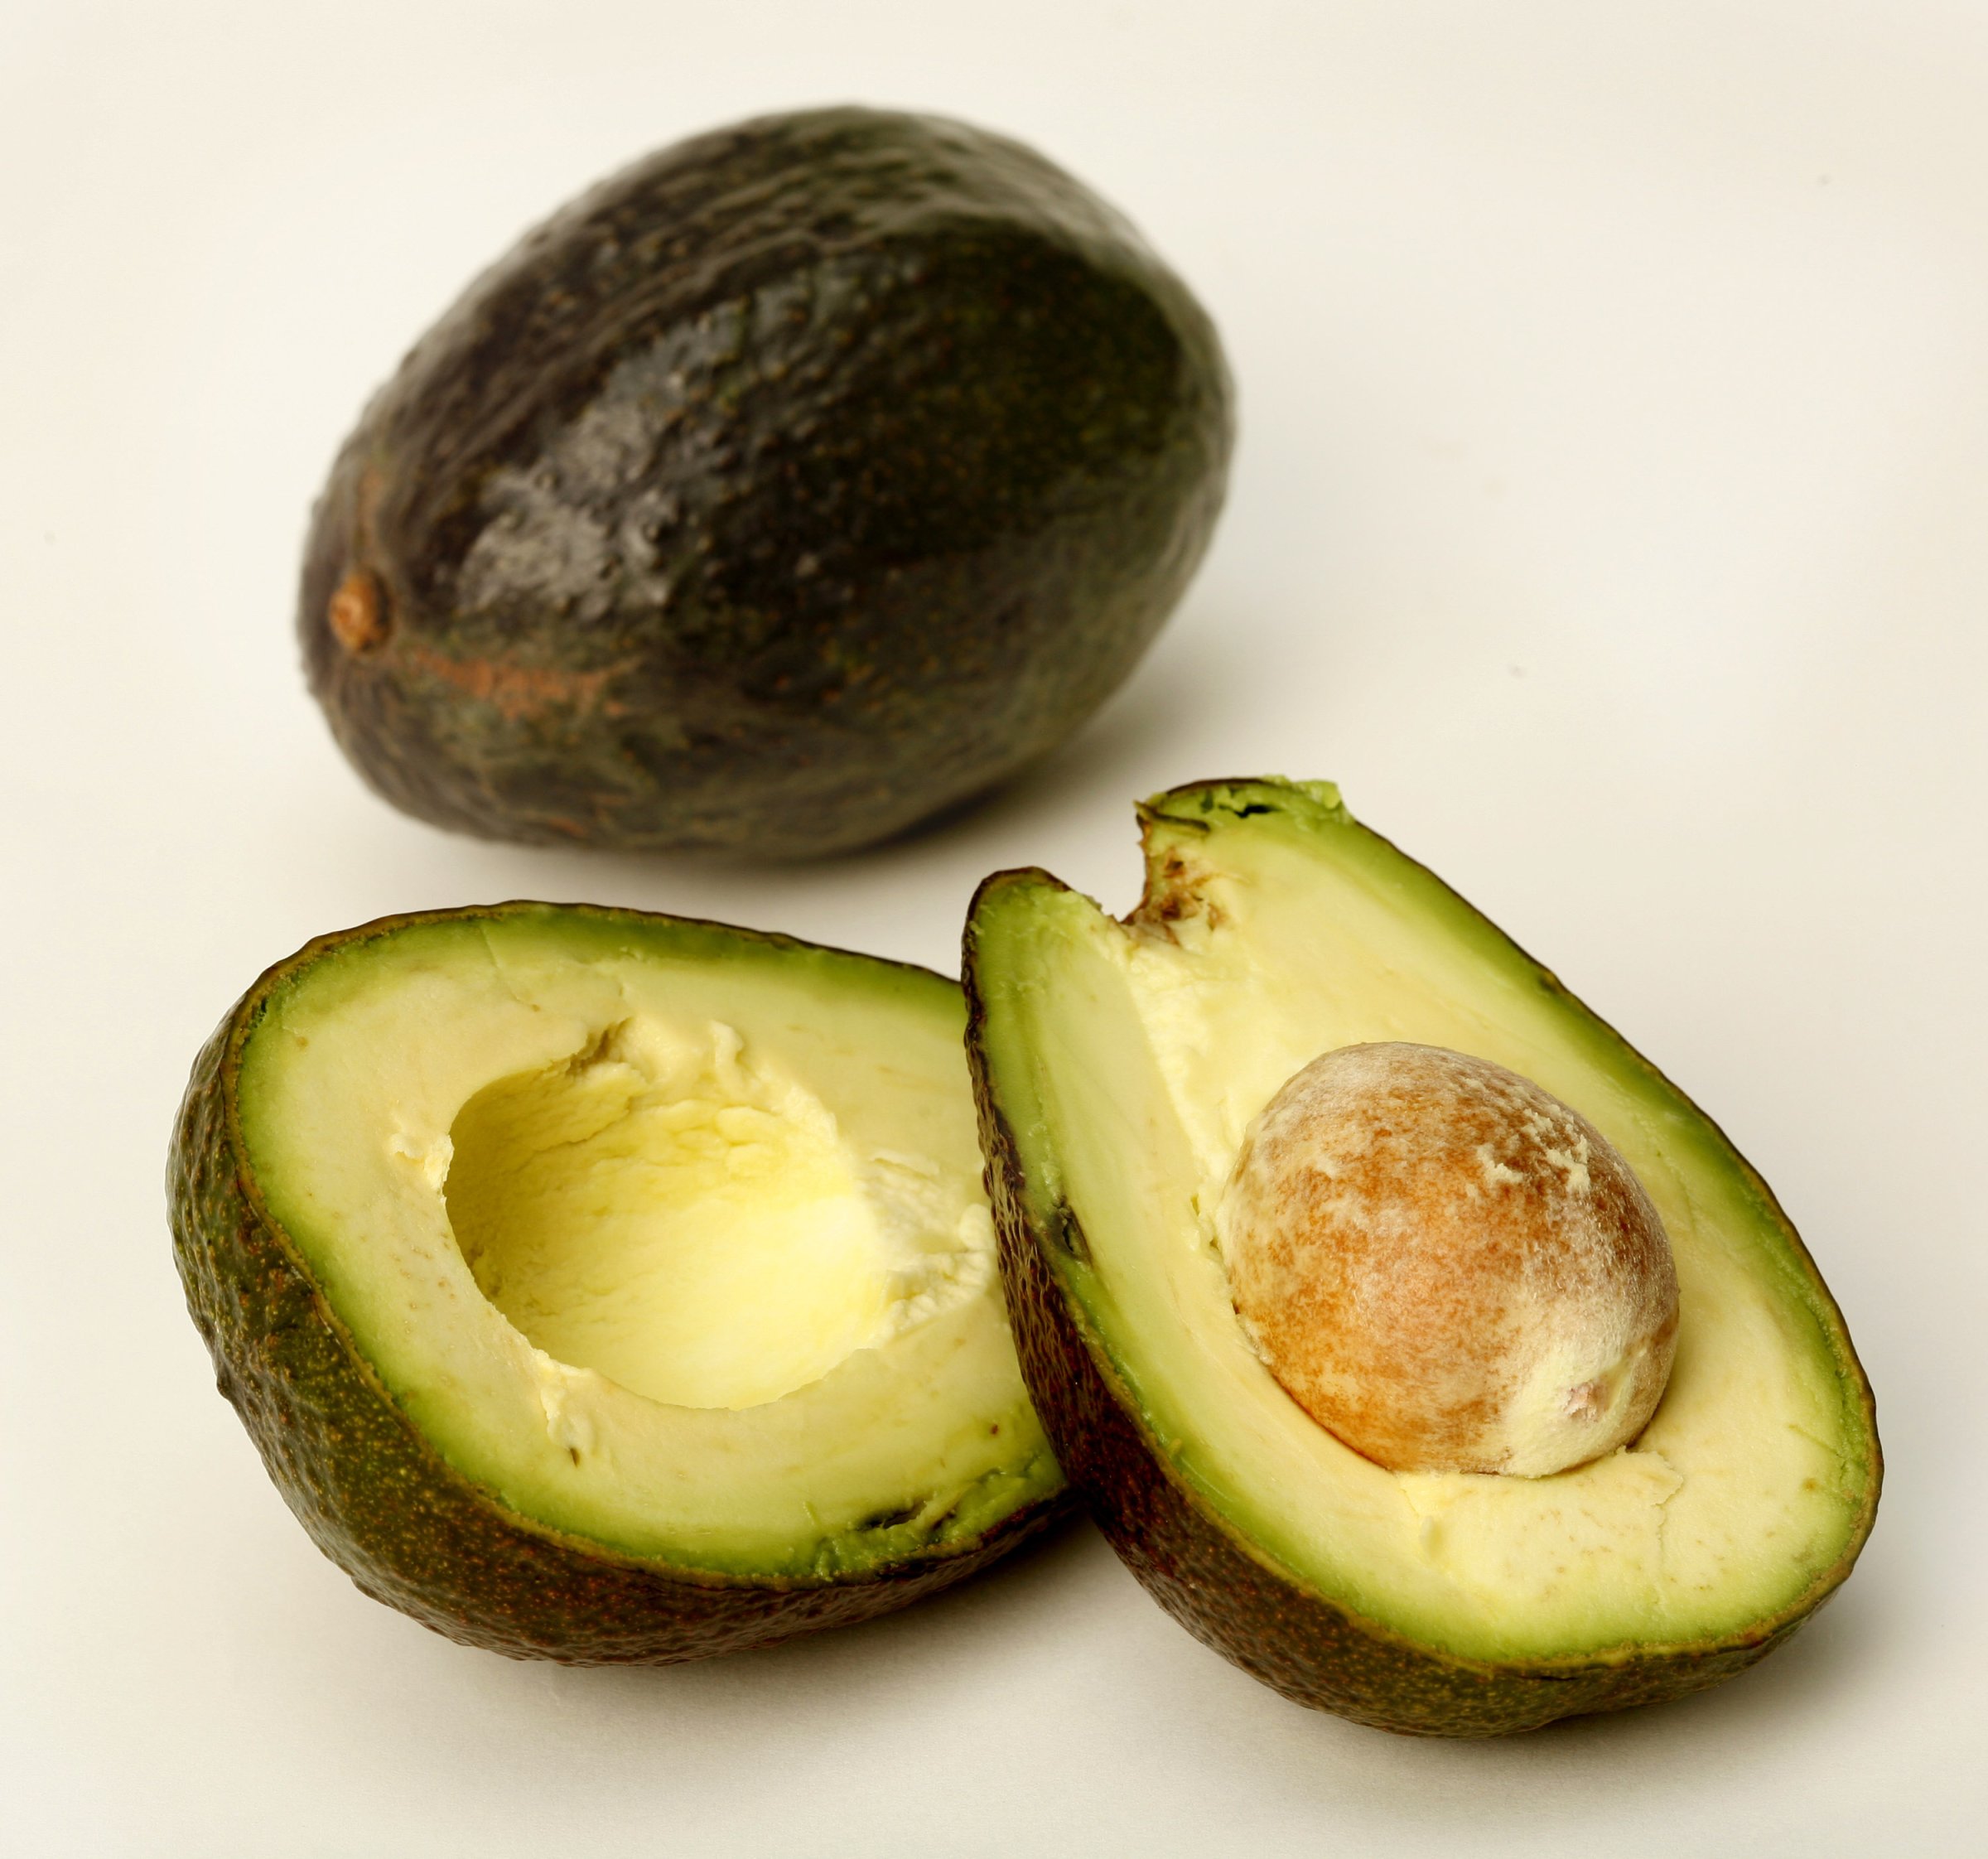 An avocado contains about 27 calories and 37 grams of fat, b